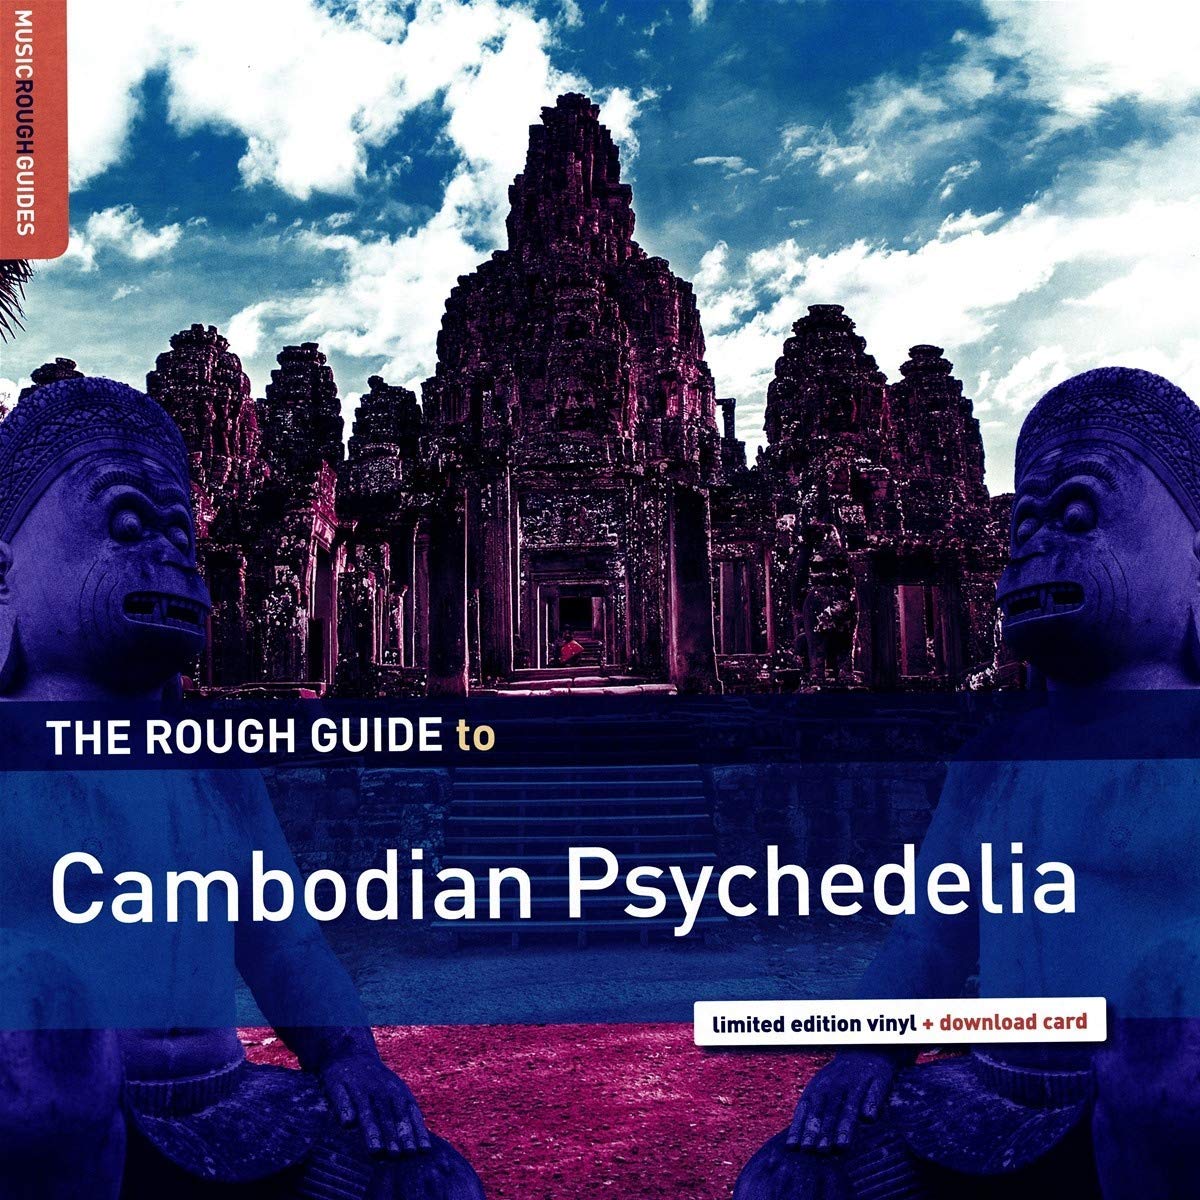 V.A. (THE ROUGH GUIDE TO CAMBODIAN PSYCHEDELIA) / オムニバス / THE ROUGH GUIDE TO CAMBODIAN PSYCHEDELIA